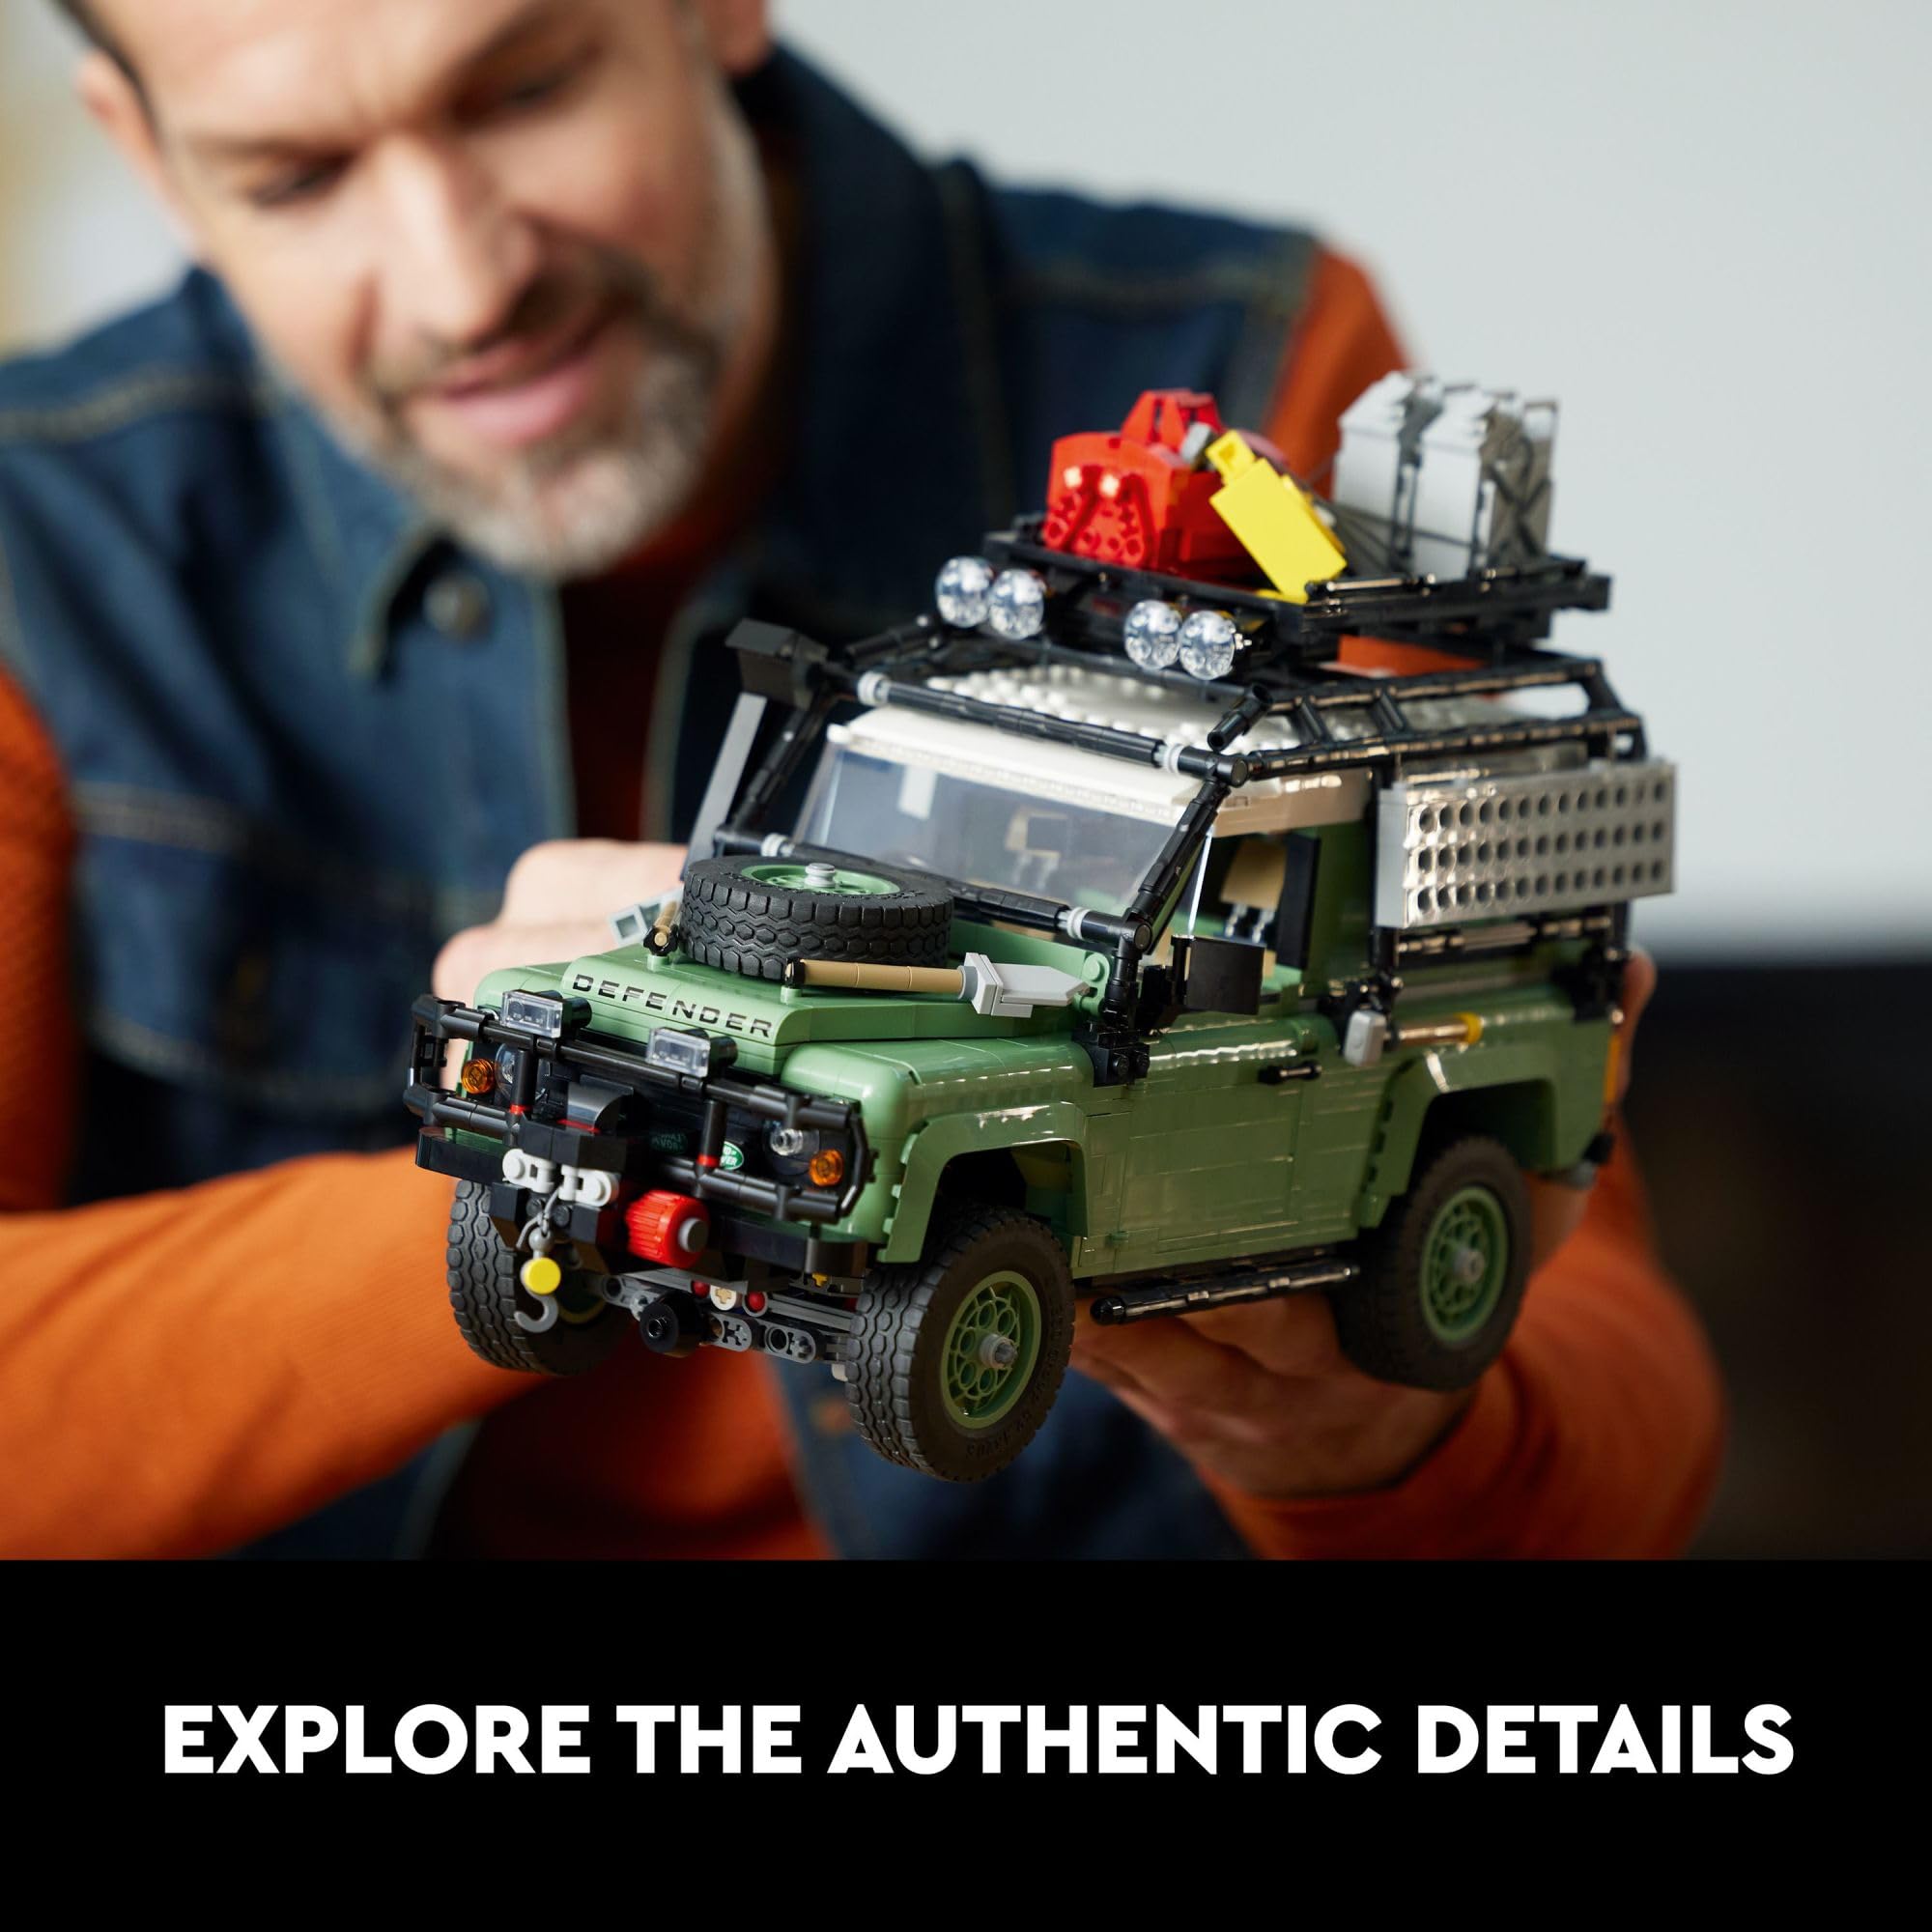 LEGO Icons Land Rover Classic Defender 90 10317 Model Car Building Set for Adults and Classic Car Lovers, This Immersive Project Based on an Off-Road Icon Makes a Great Graduation Gift for Him or Her